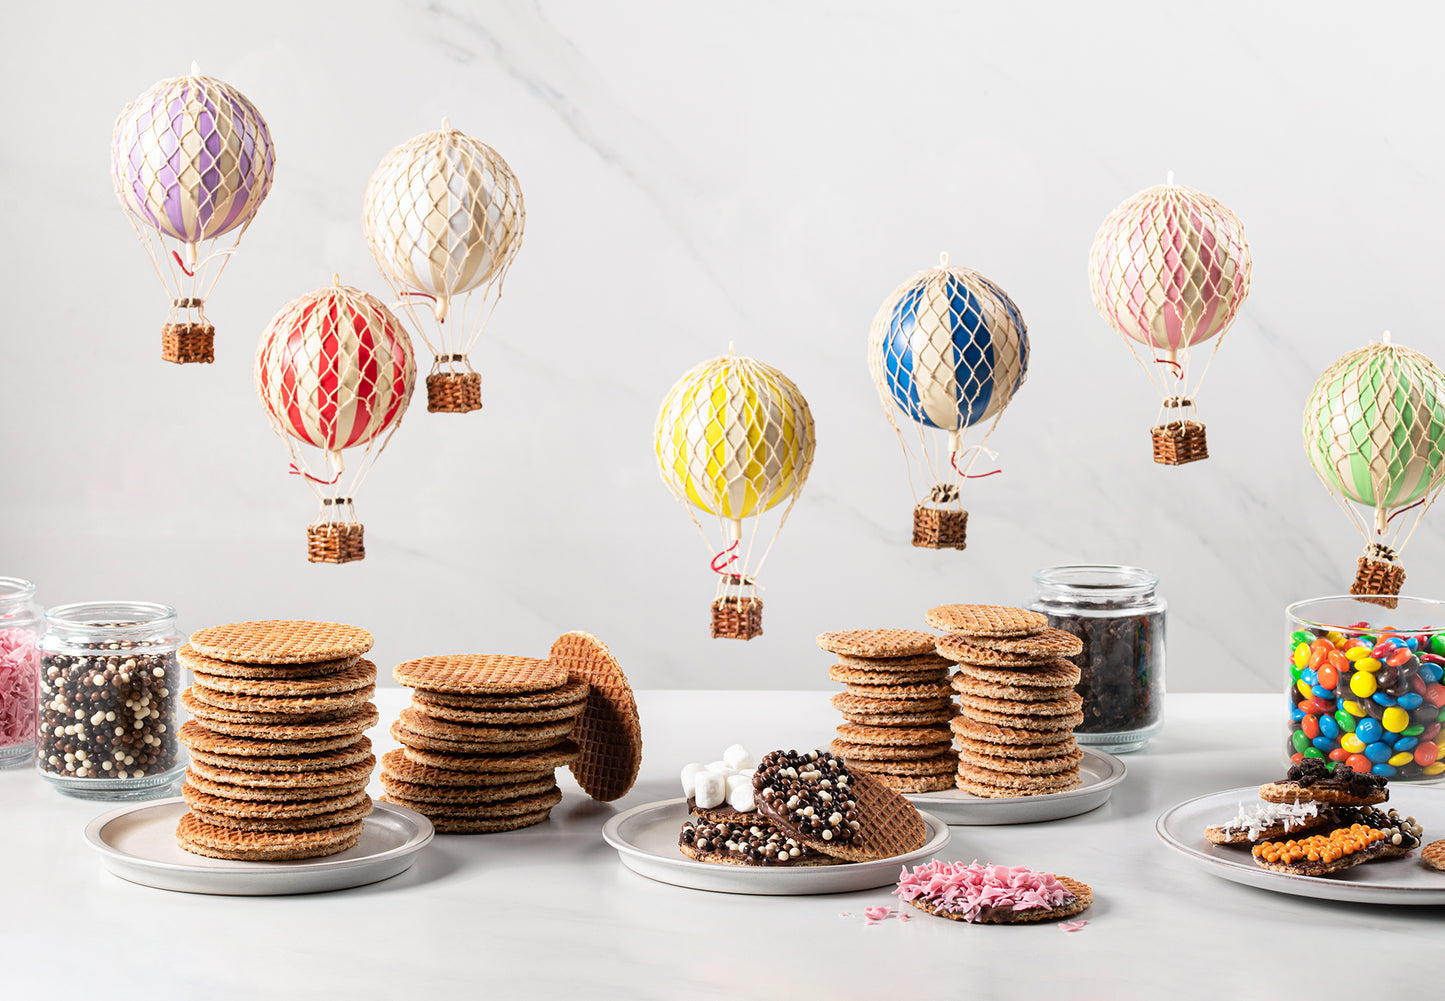 Wonderen Stroopwafels' Authentic Red Stroopwafel Tin Can and hot air balloons on a table.